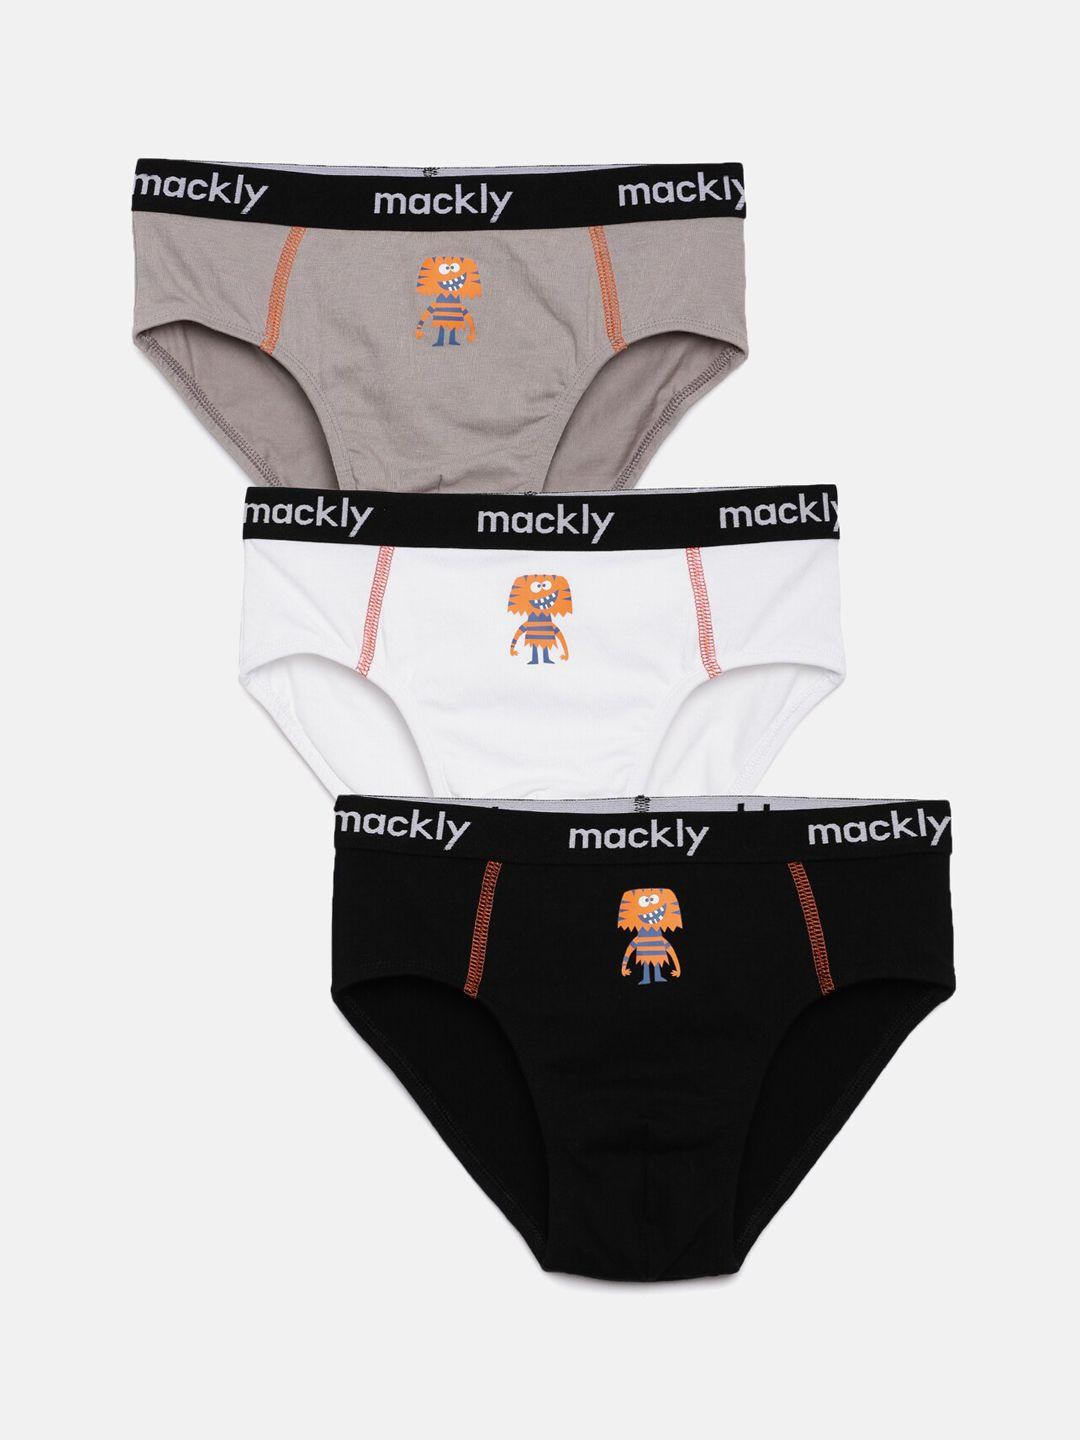 mackly boys pack of 3 basic briefs